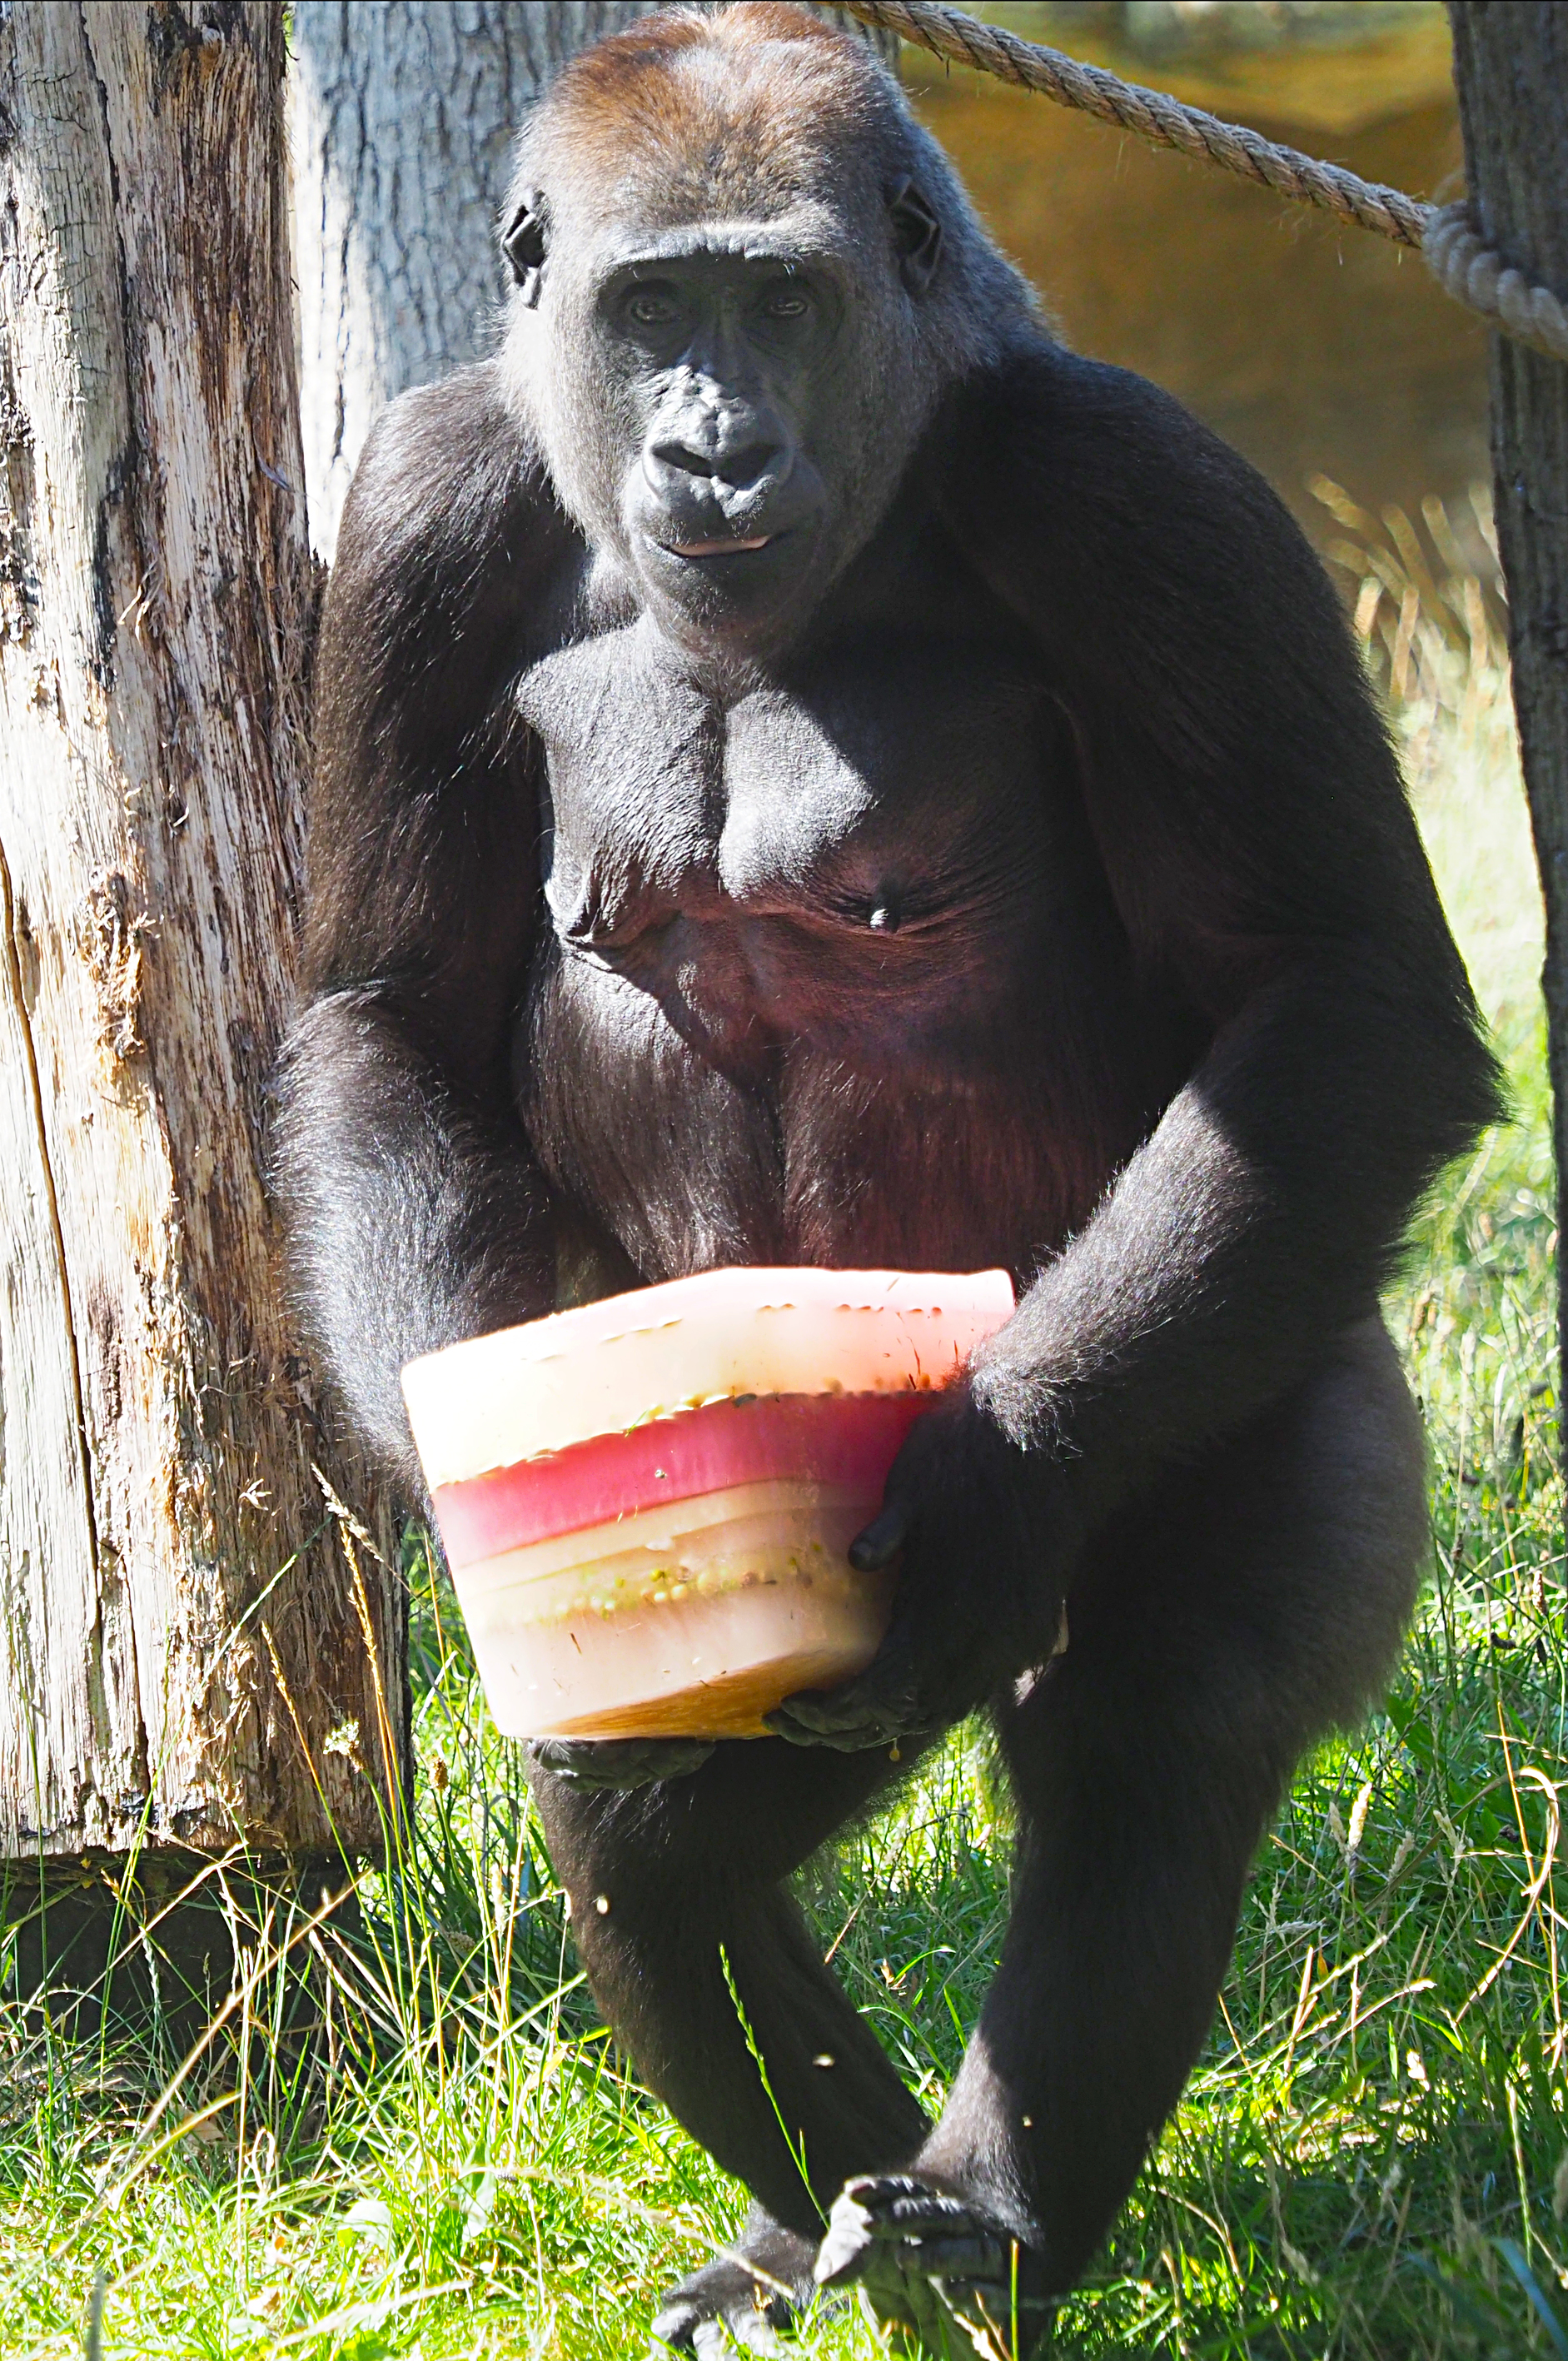 Gorilla holding an ice lolly